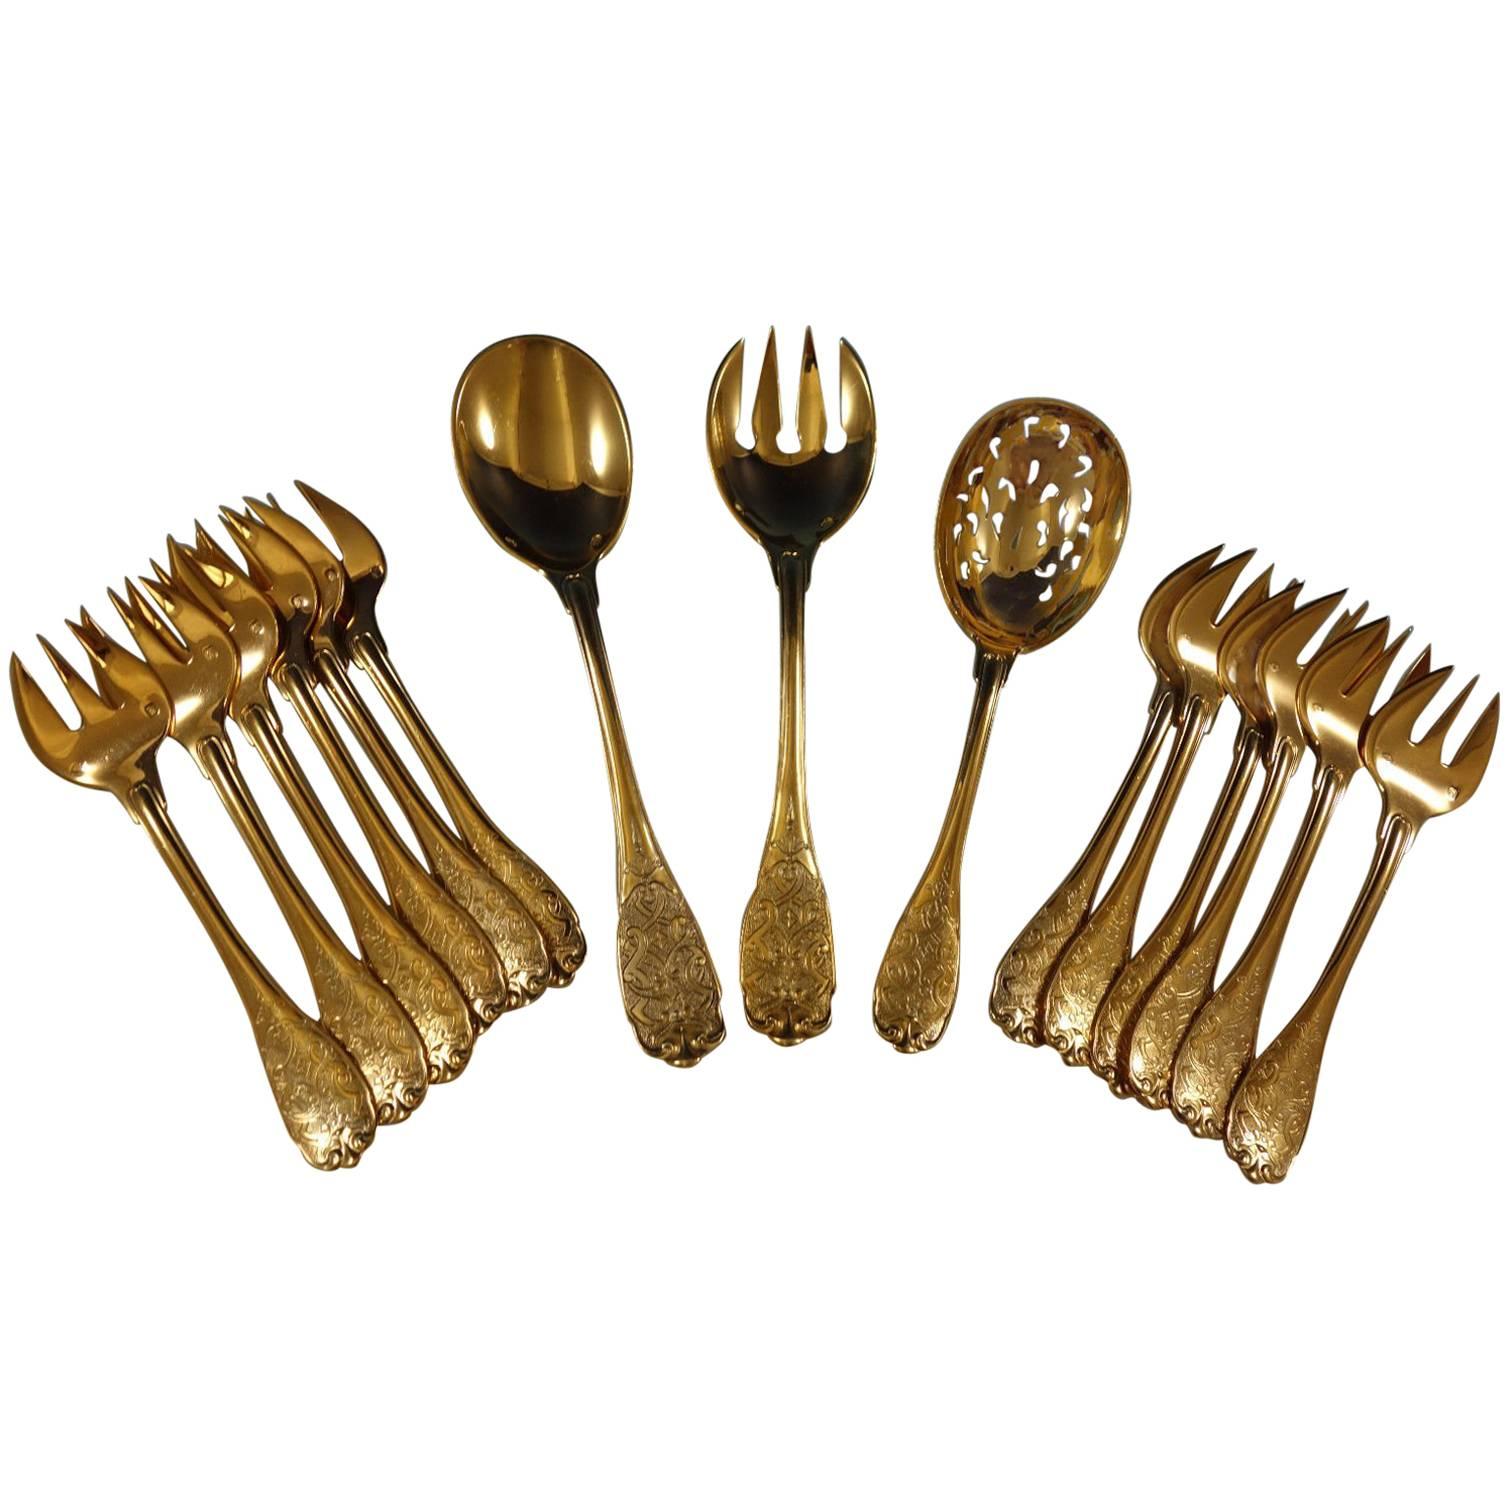 Elysee by Puiforcat French Sterling Silver Vermeil Gold Hors D'oeuvres Set 15 Pc